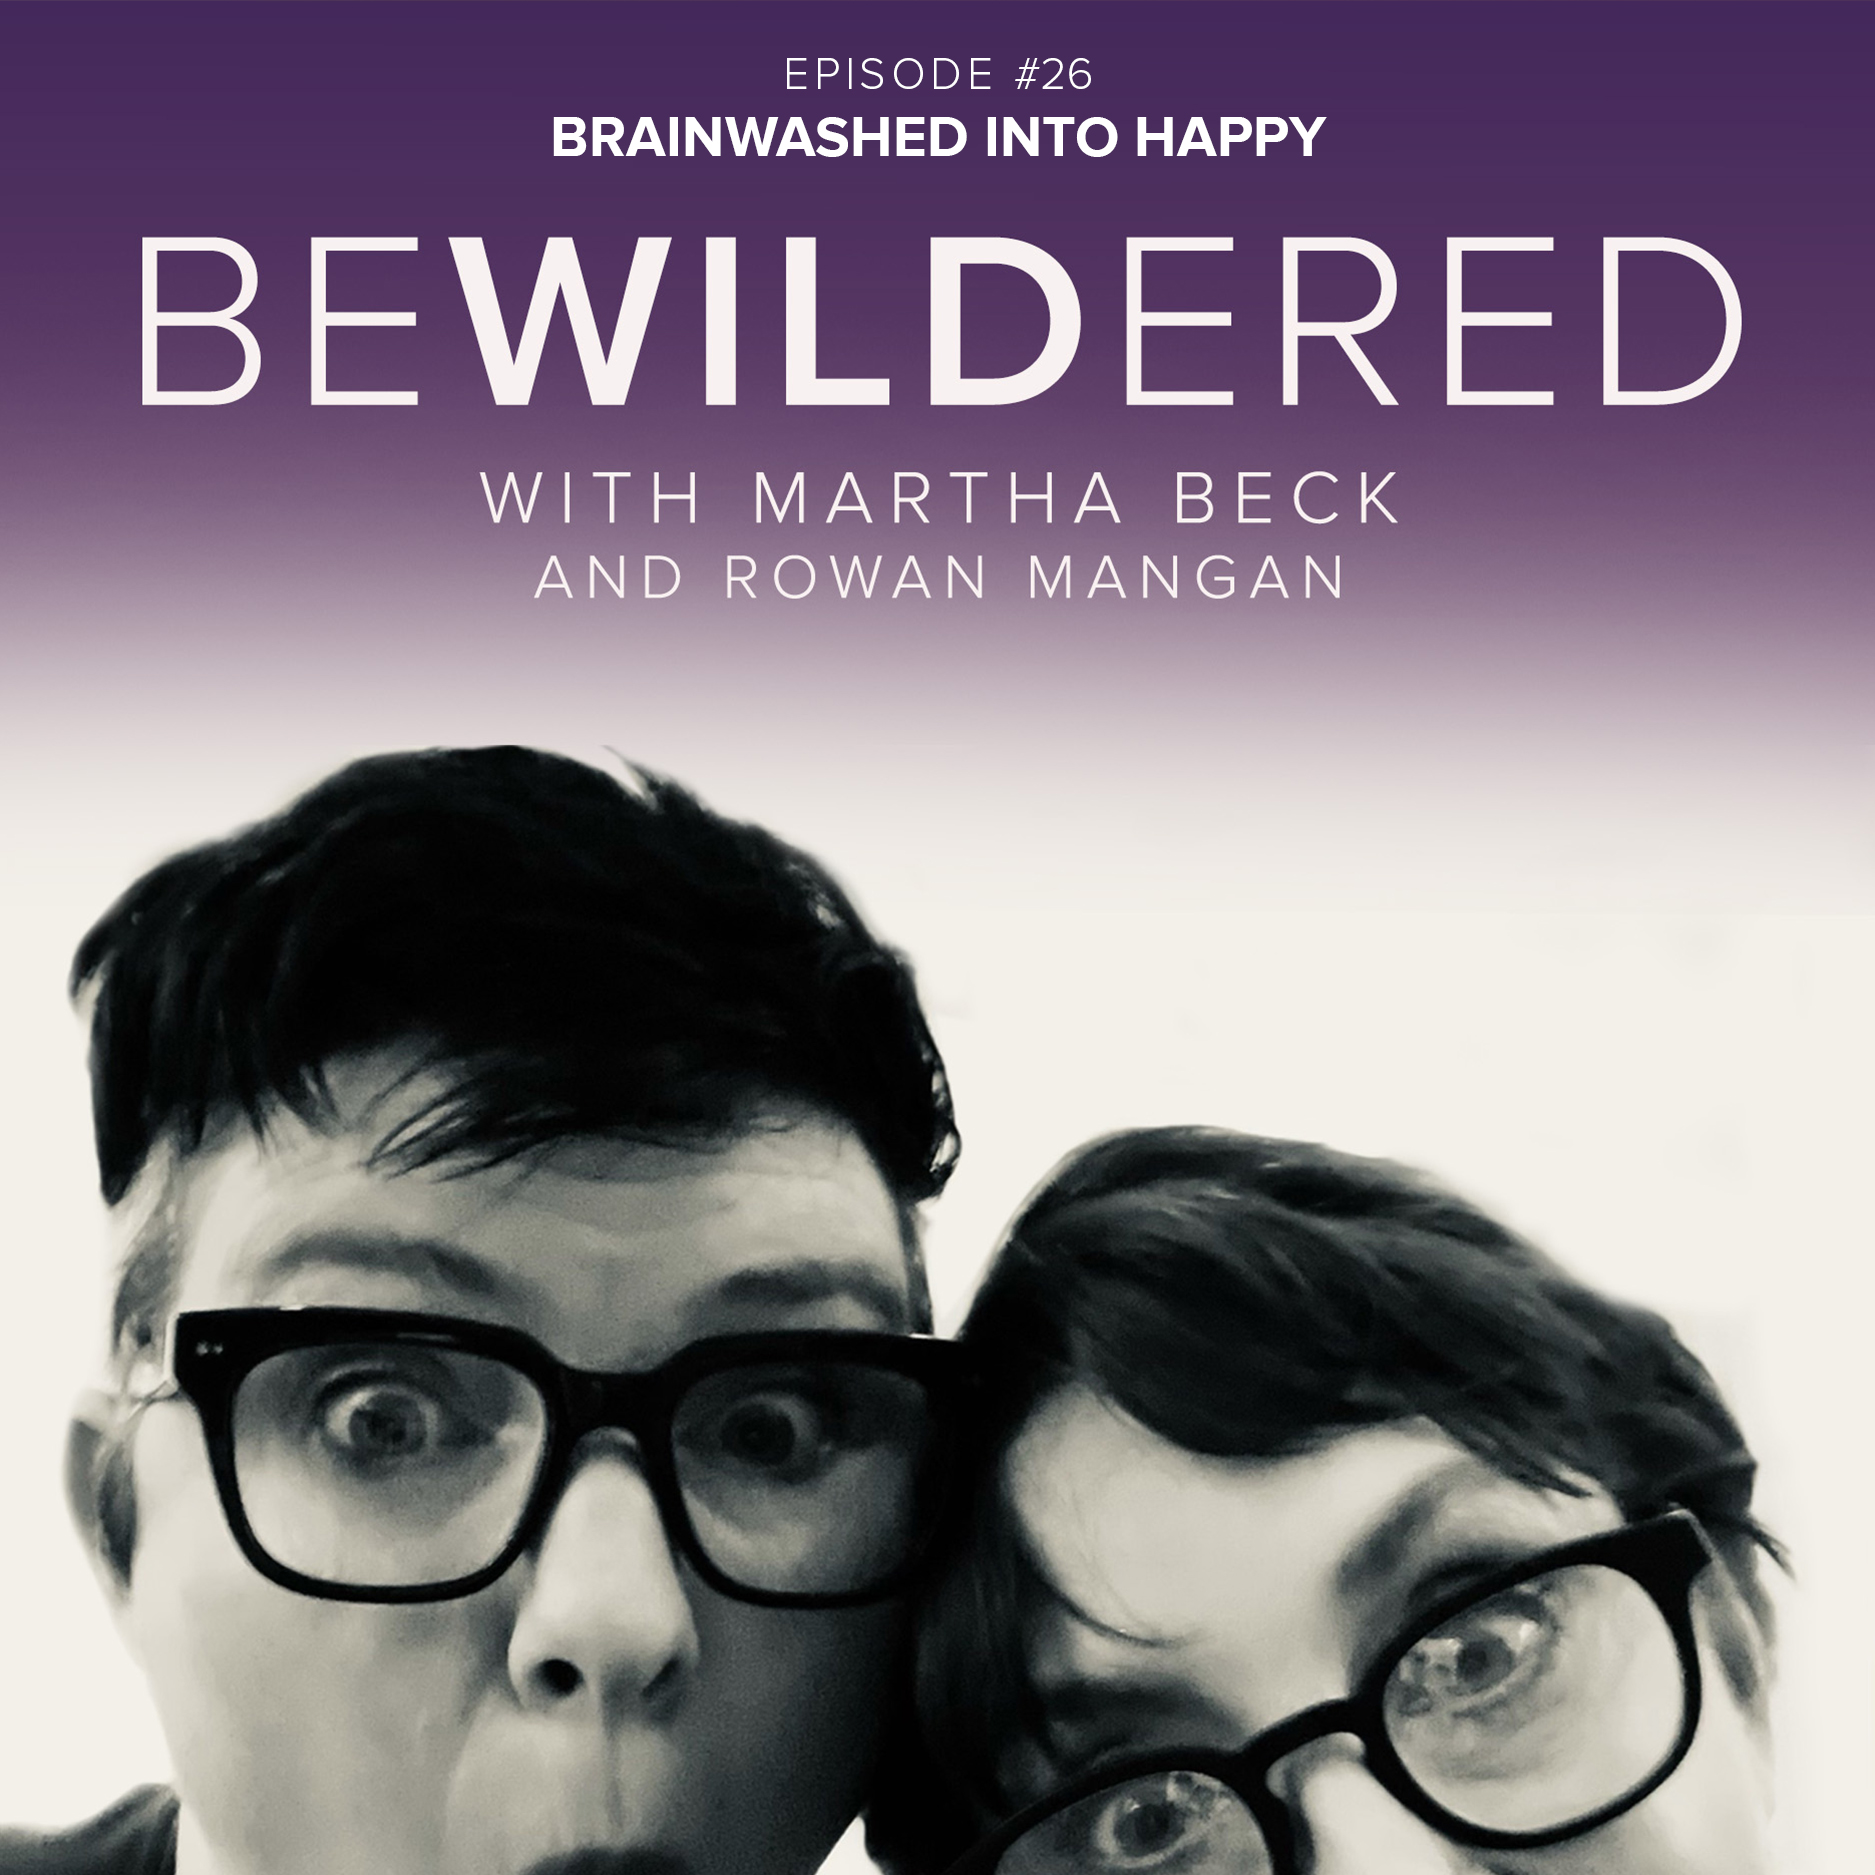 Image for Episode #26 Brainwashed into Happy for the Bewildered Podcast with Martha Beck and Rowan Mangan